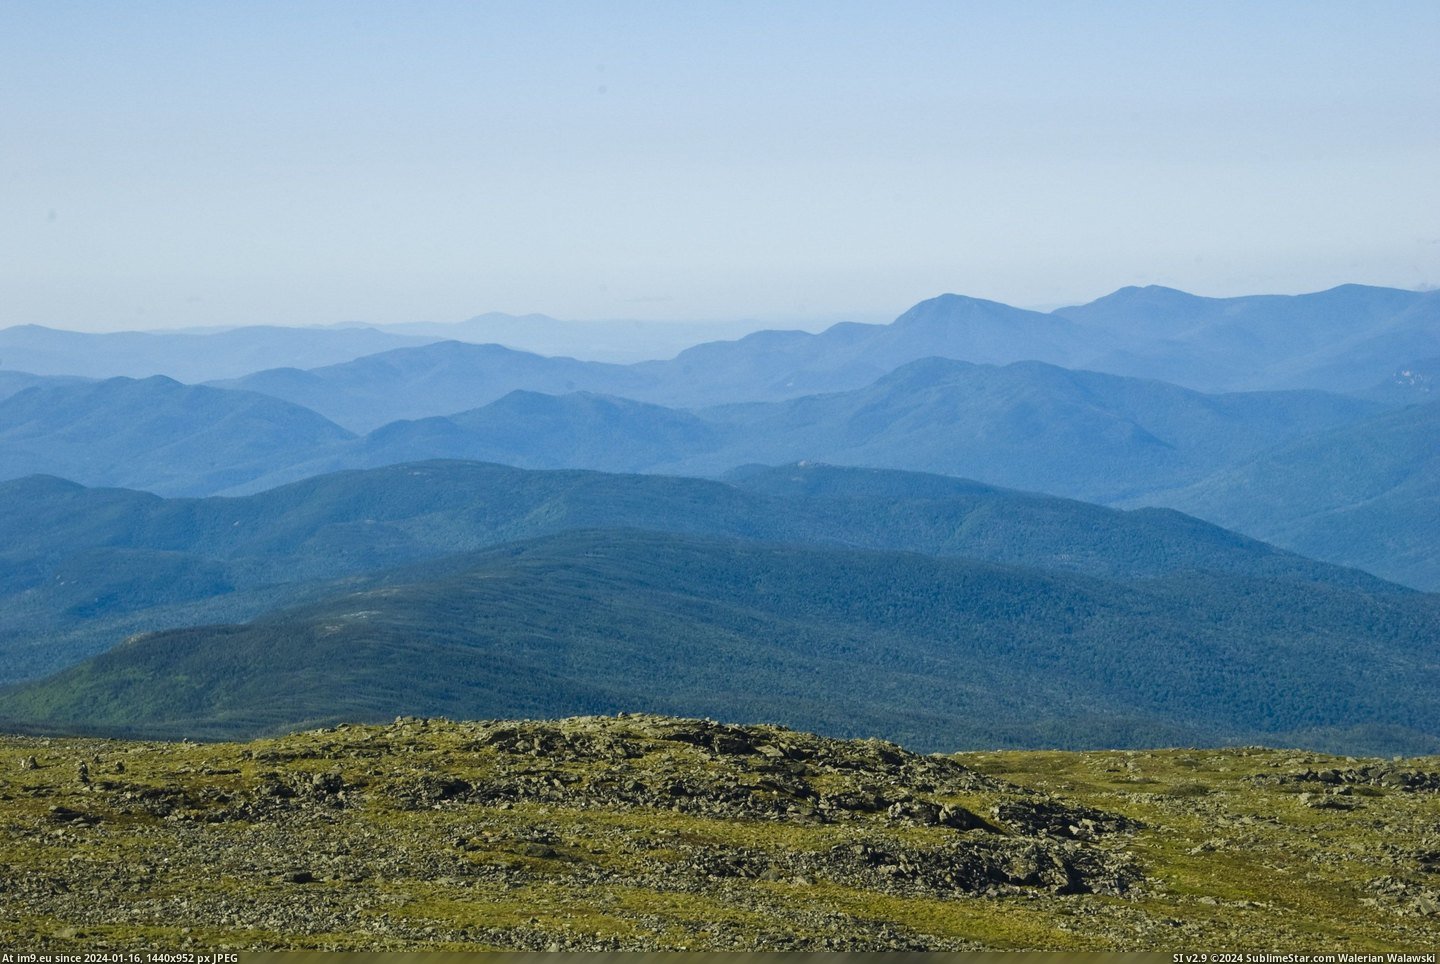 #Distance #Mount #Rare #Summit #Judge #3008x2000 #Washington #Range #Mile [Earthporn] The rare 100-mile view from the summit of Mount Washington, NH [3008x2000]- (they judge distance by which range you  Pic. (Obraz z album My r/EARTHPORN favs))